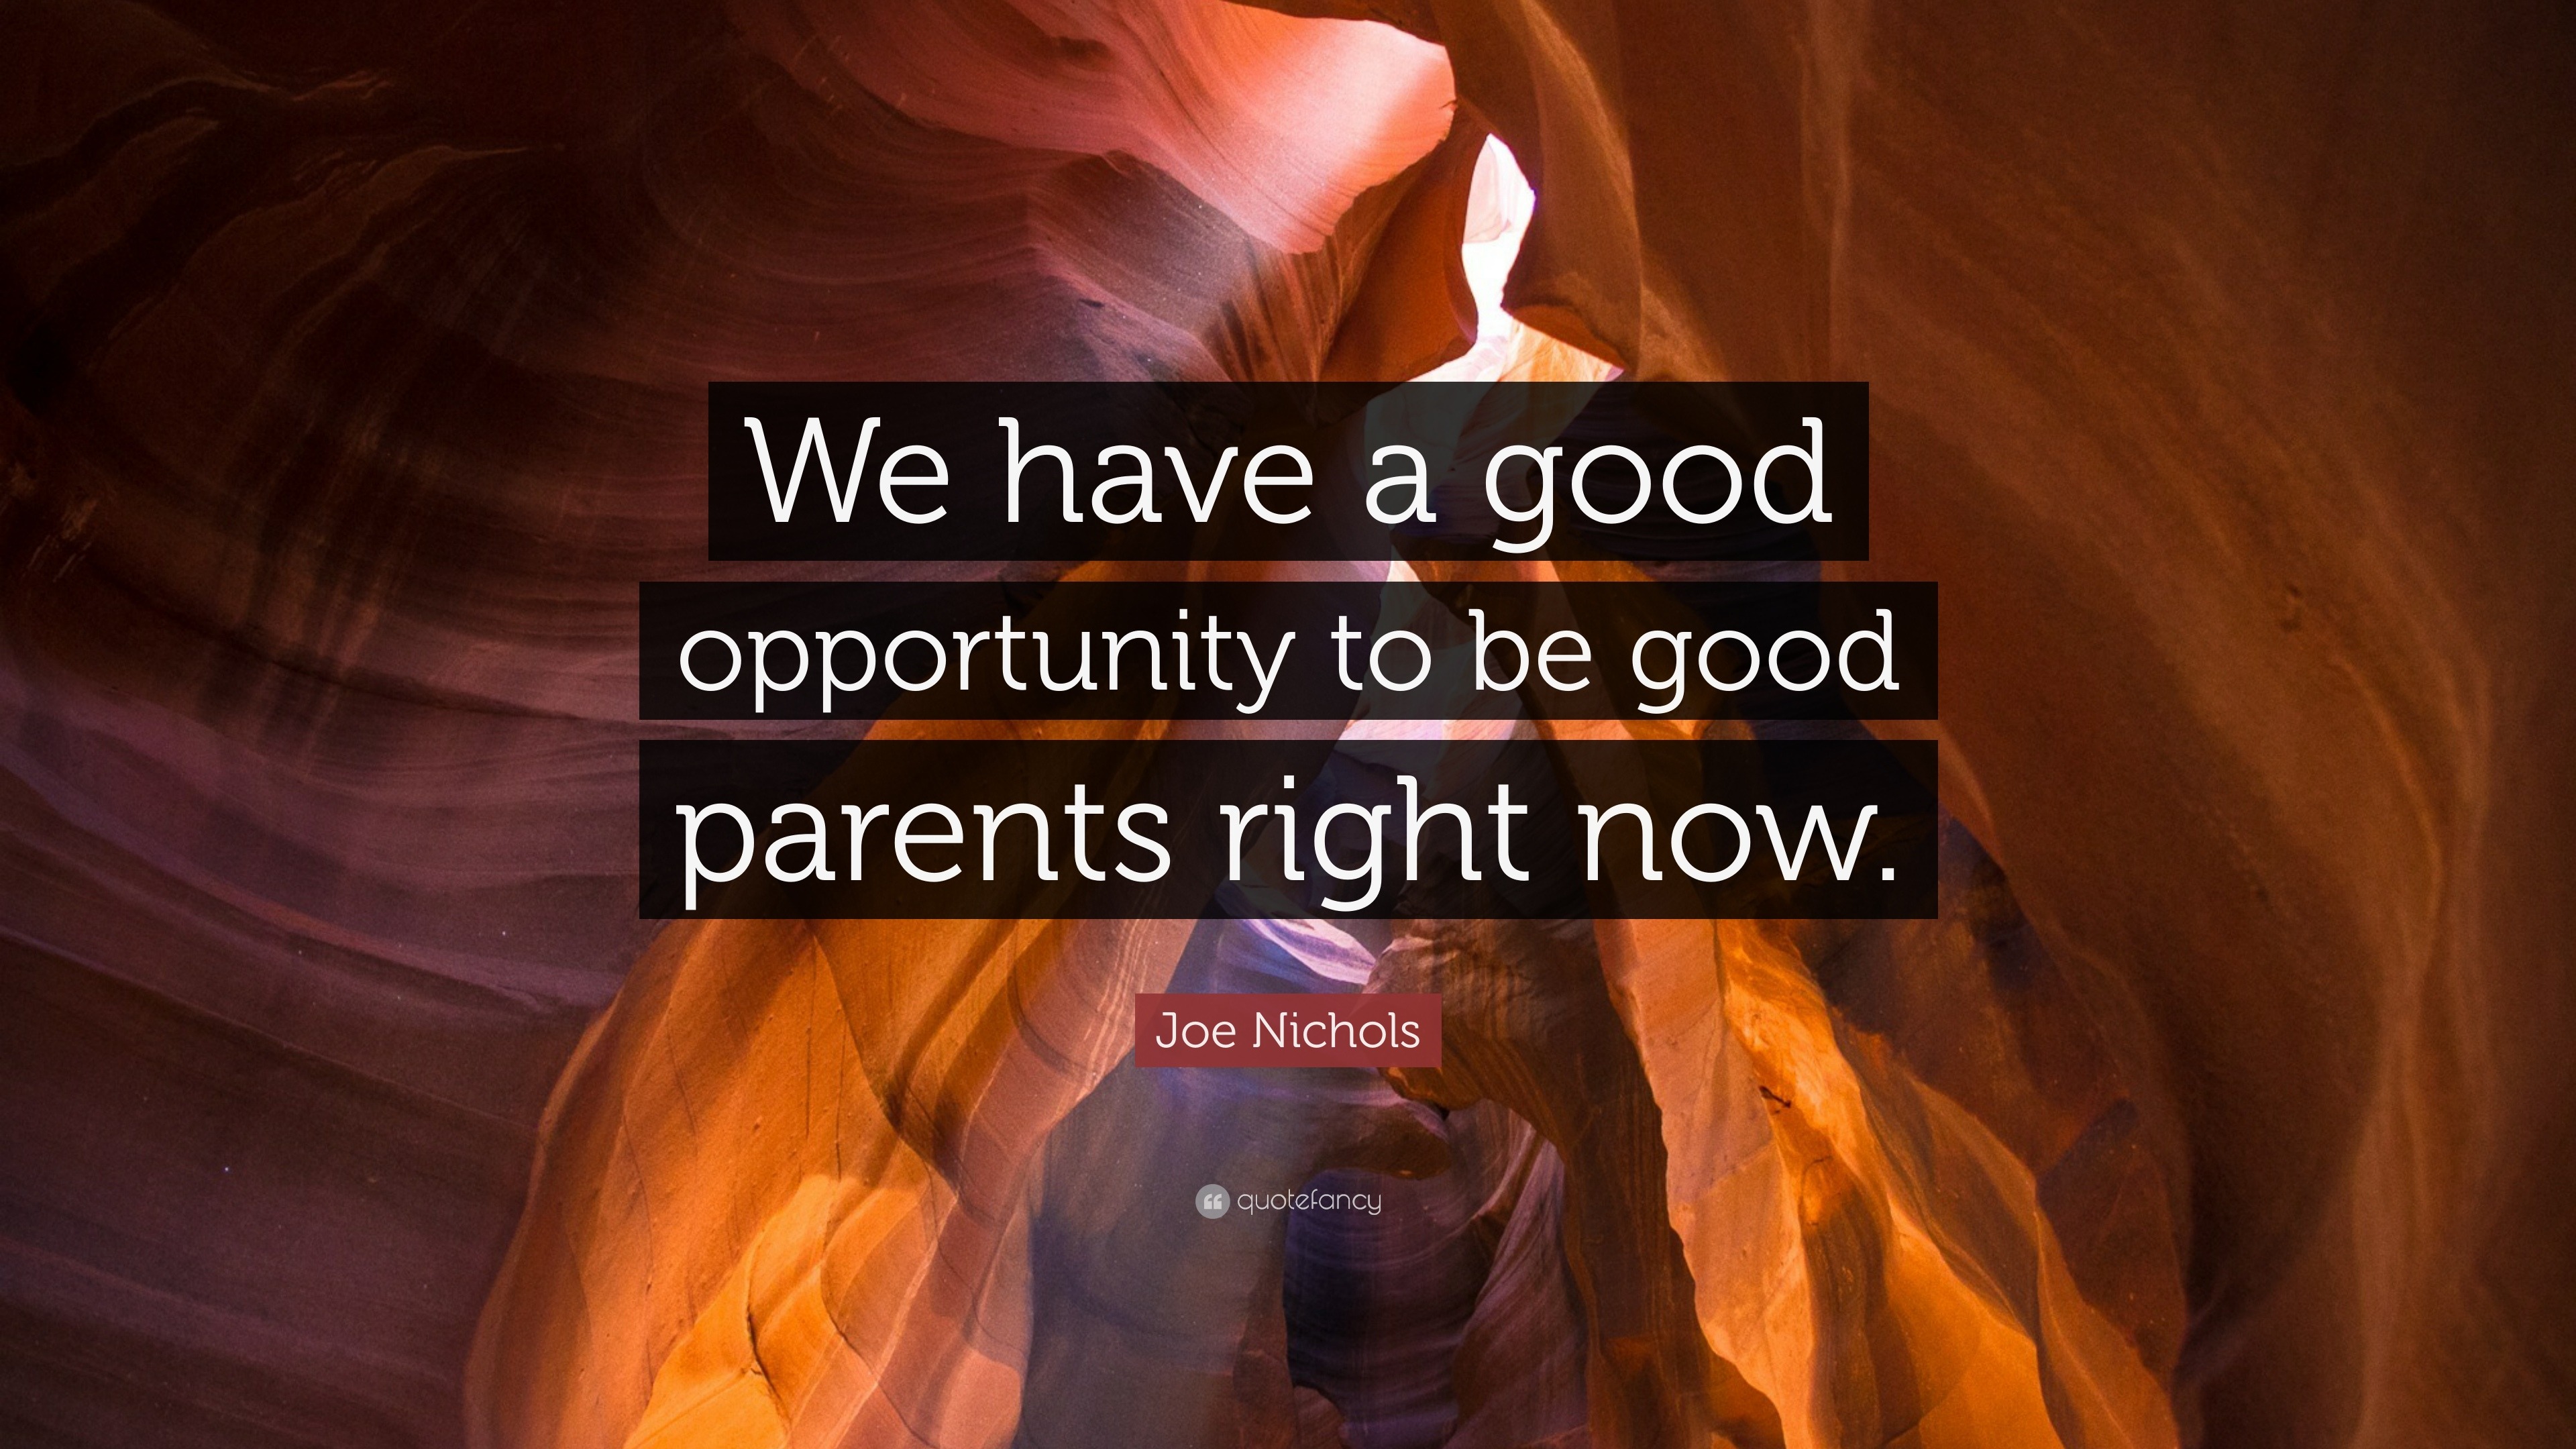 Joe Nichols Quote: “We have a good opportunity to be good parents right  now.”